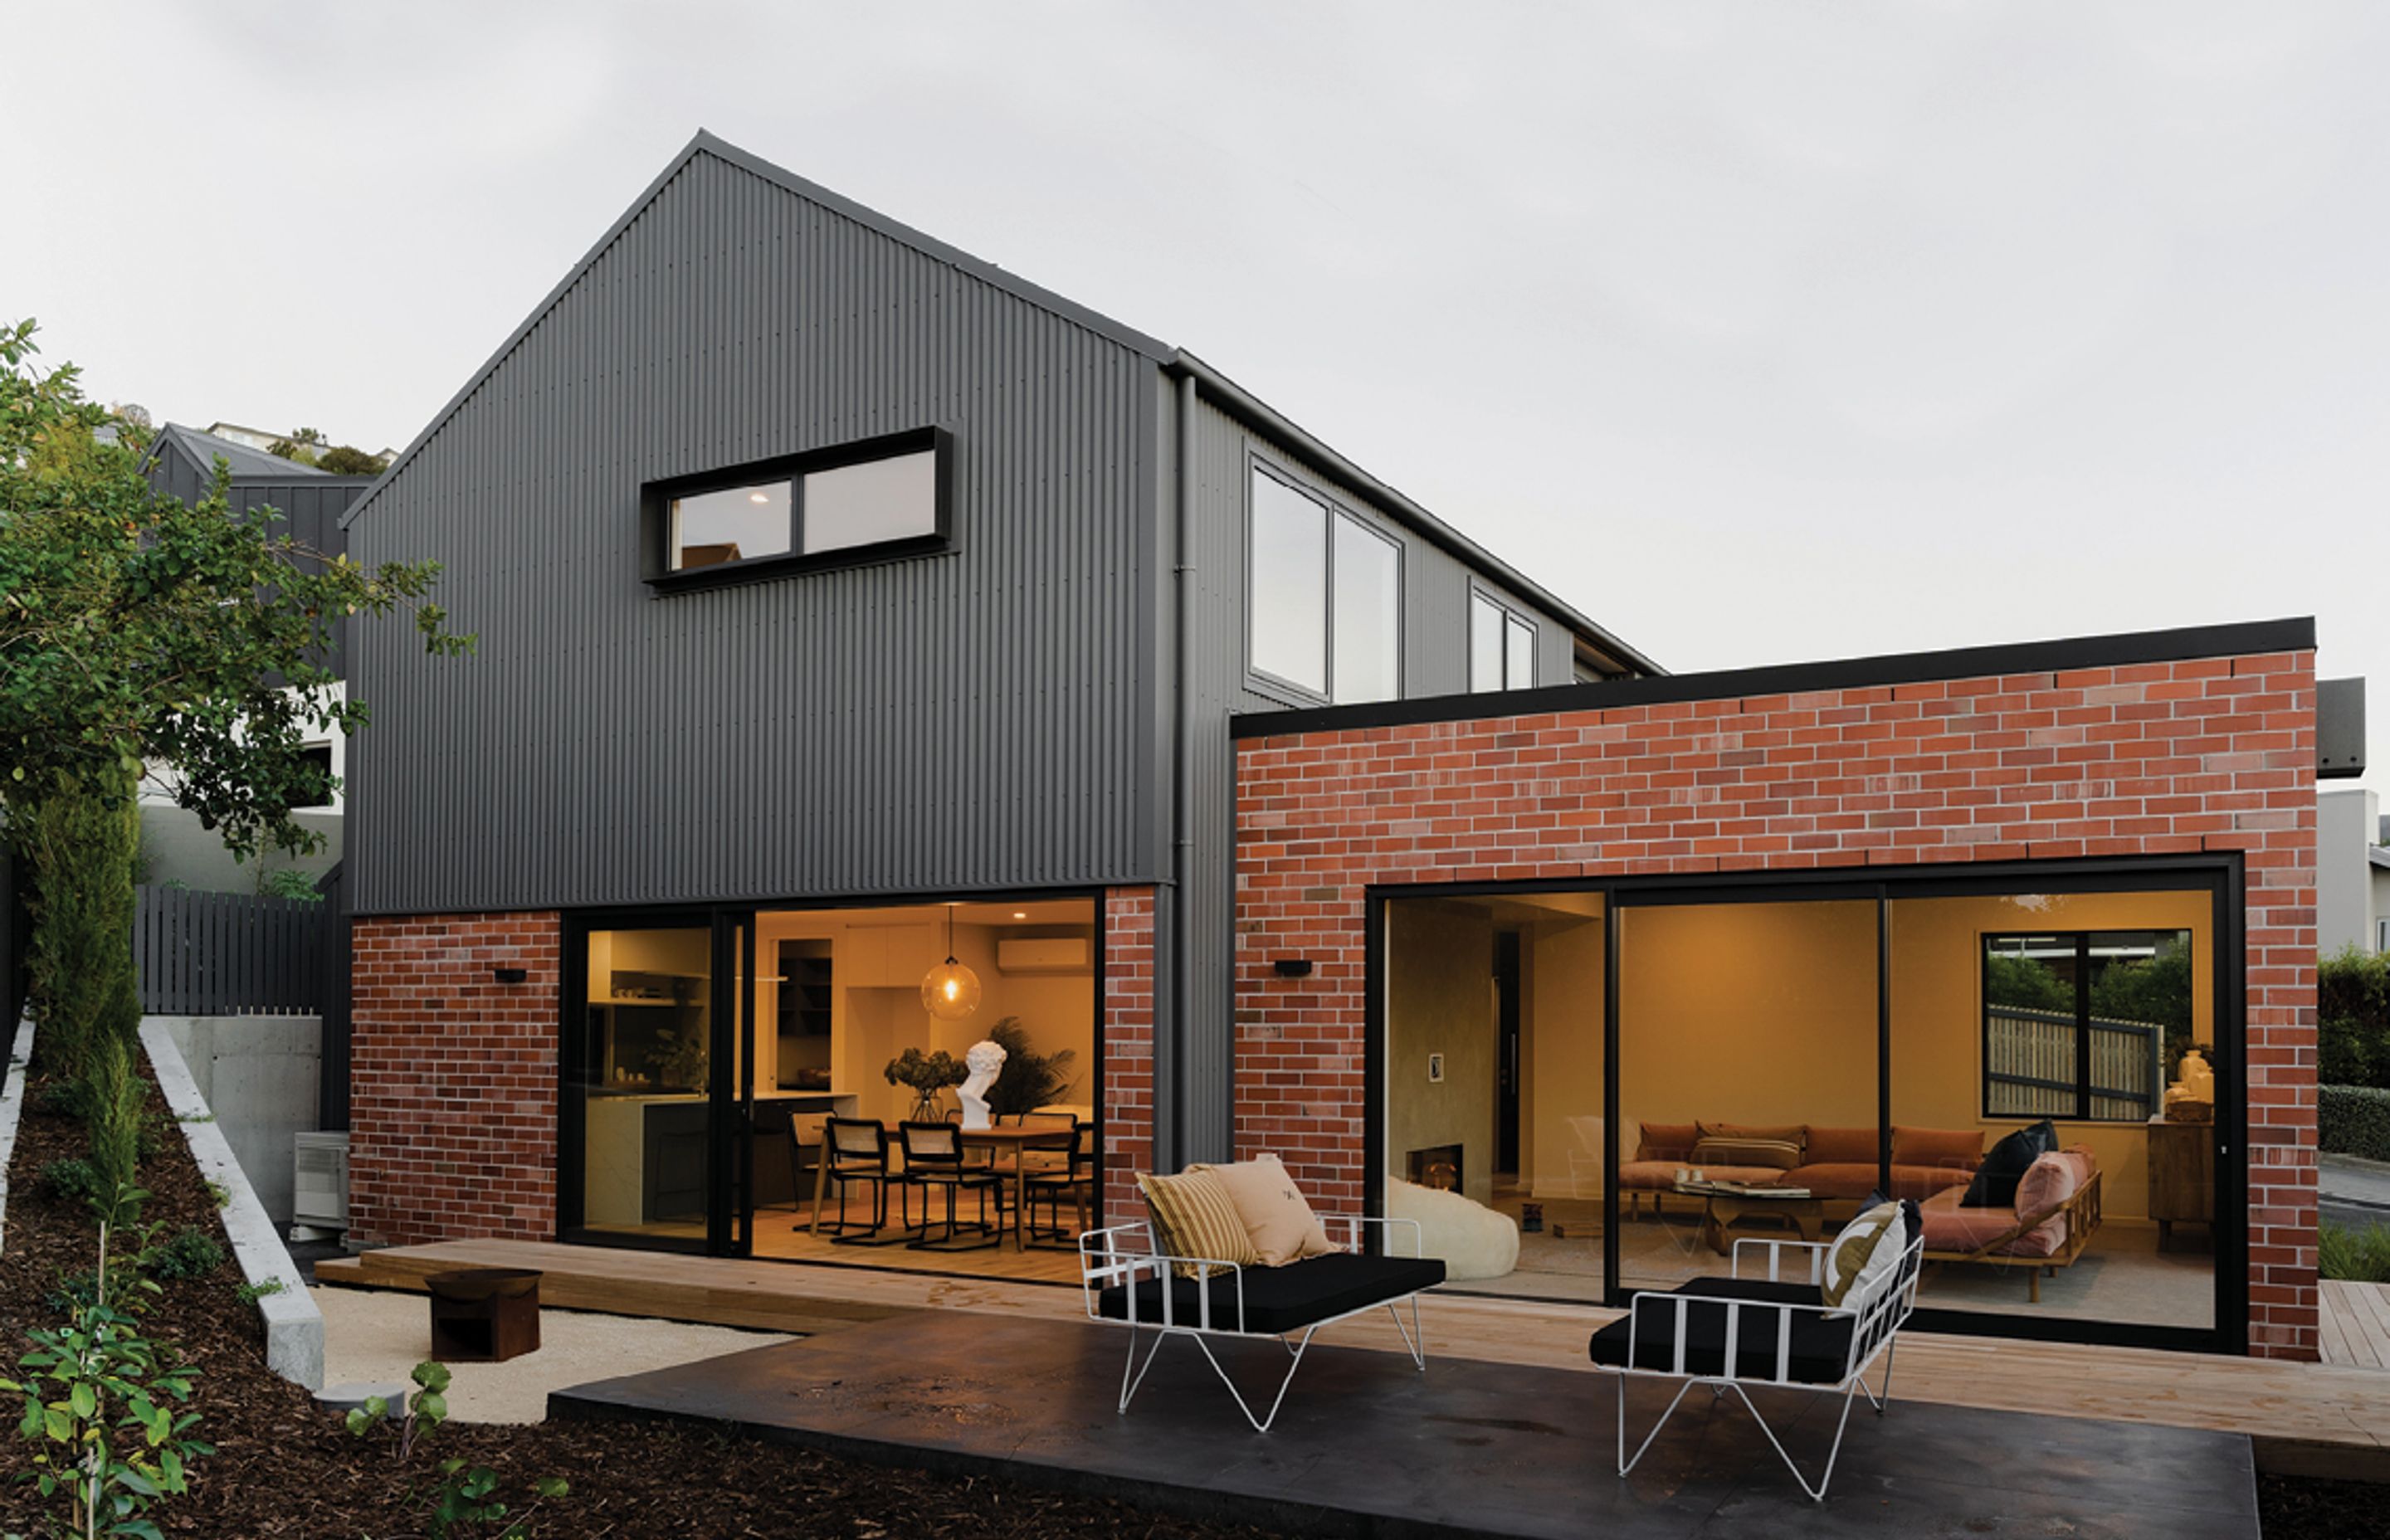 COLORSTEEL Matte has been designed for roofing, wall cladding, garage doors, fascia and rainwater applications, making it ideal for a range of residential and commercial projects.